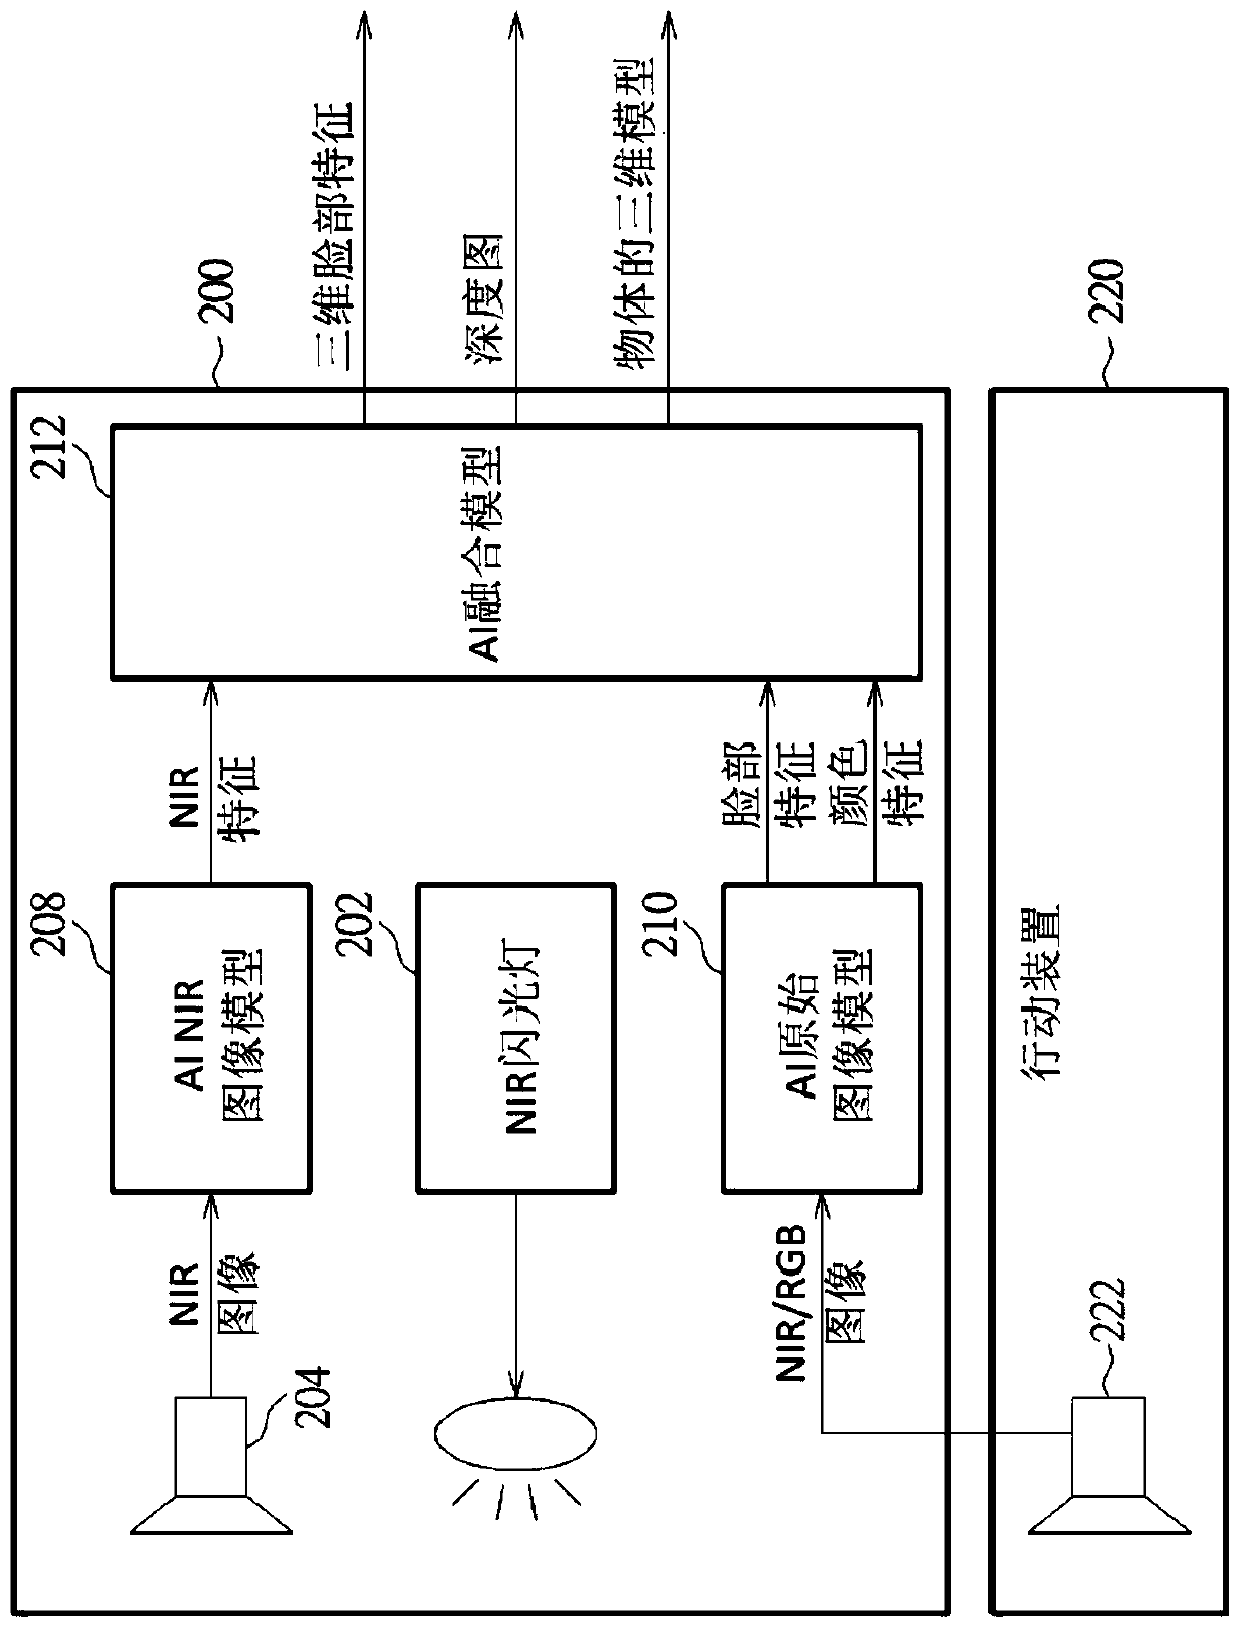 Face recognition module and method